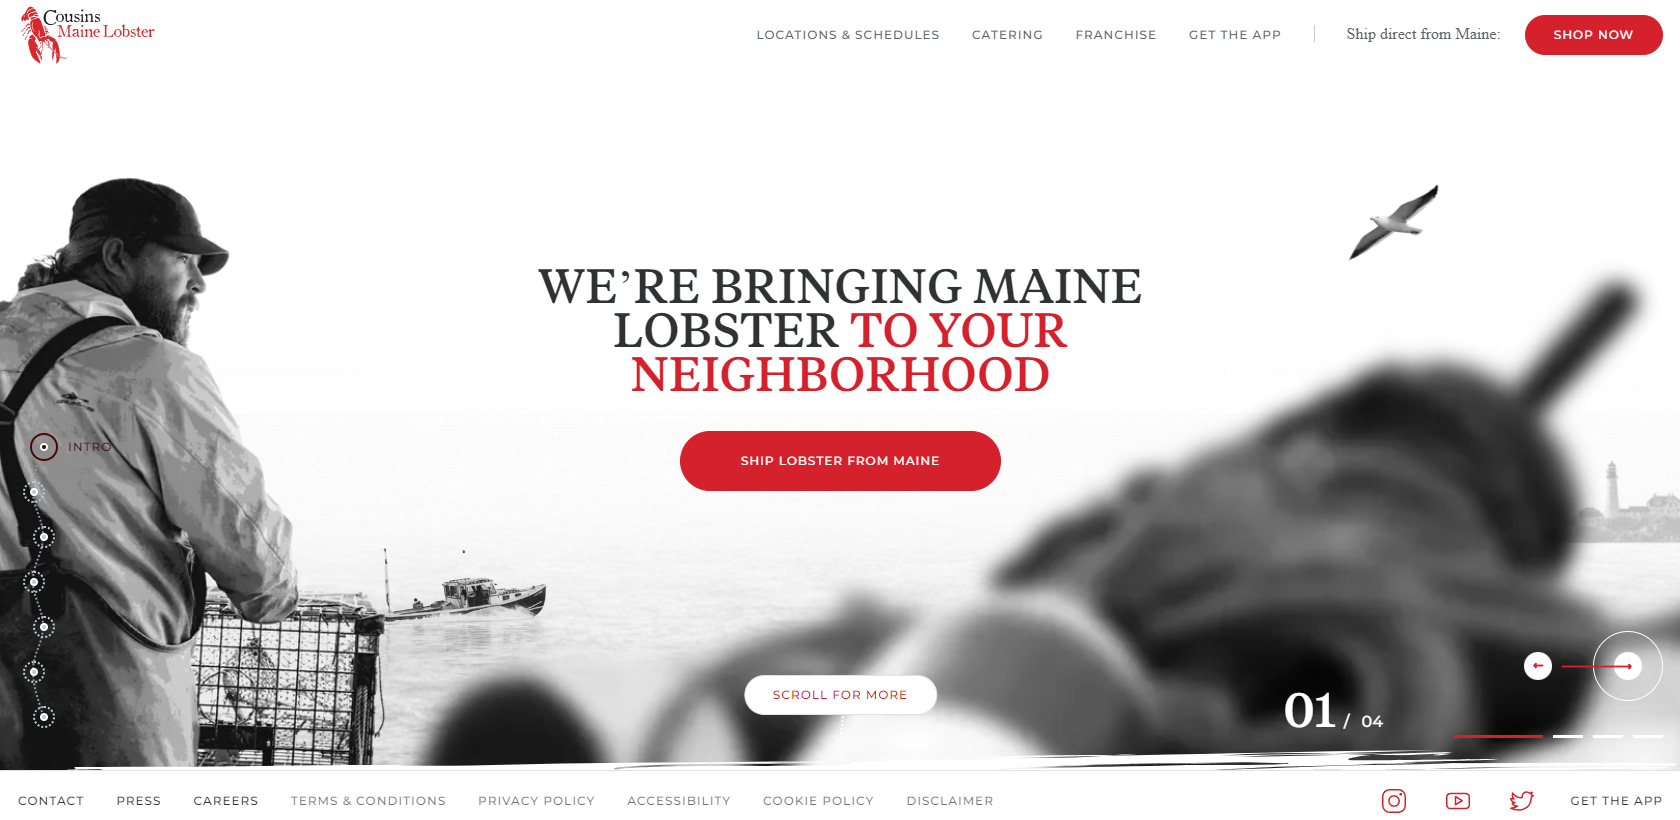 Cousins Maine Lobster homepage